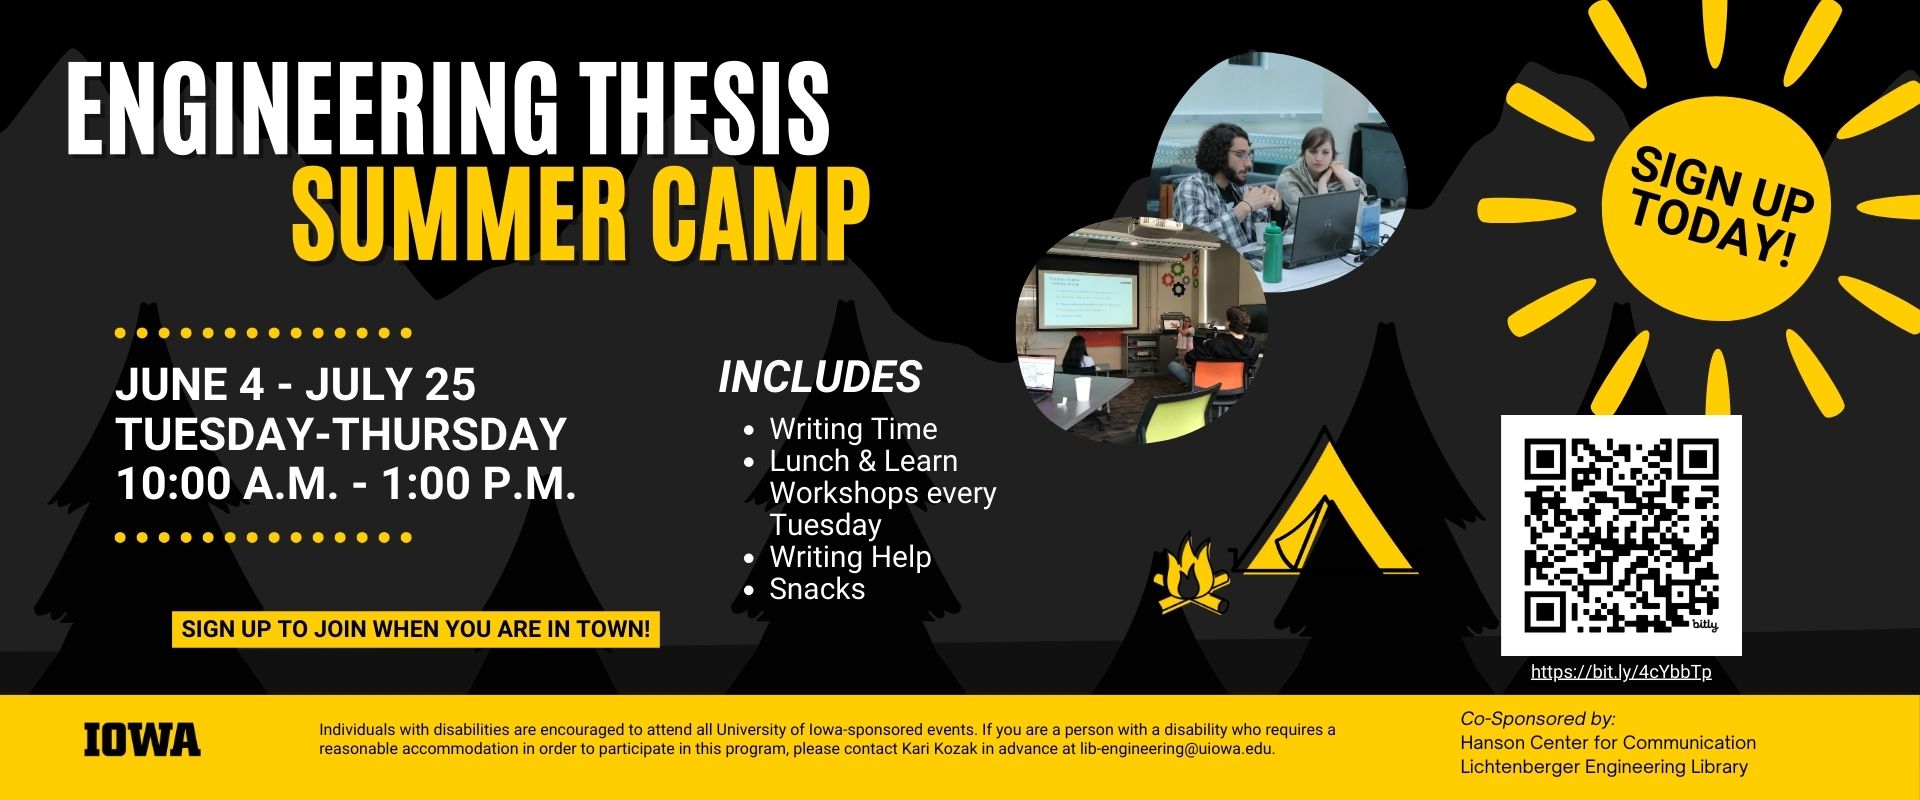 Engineering Thesis Summer Camp